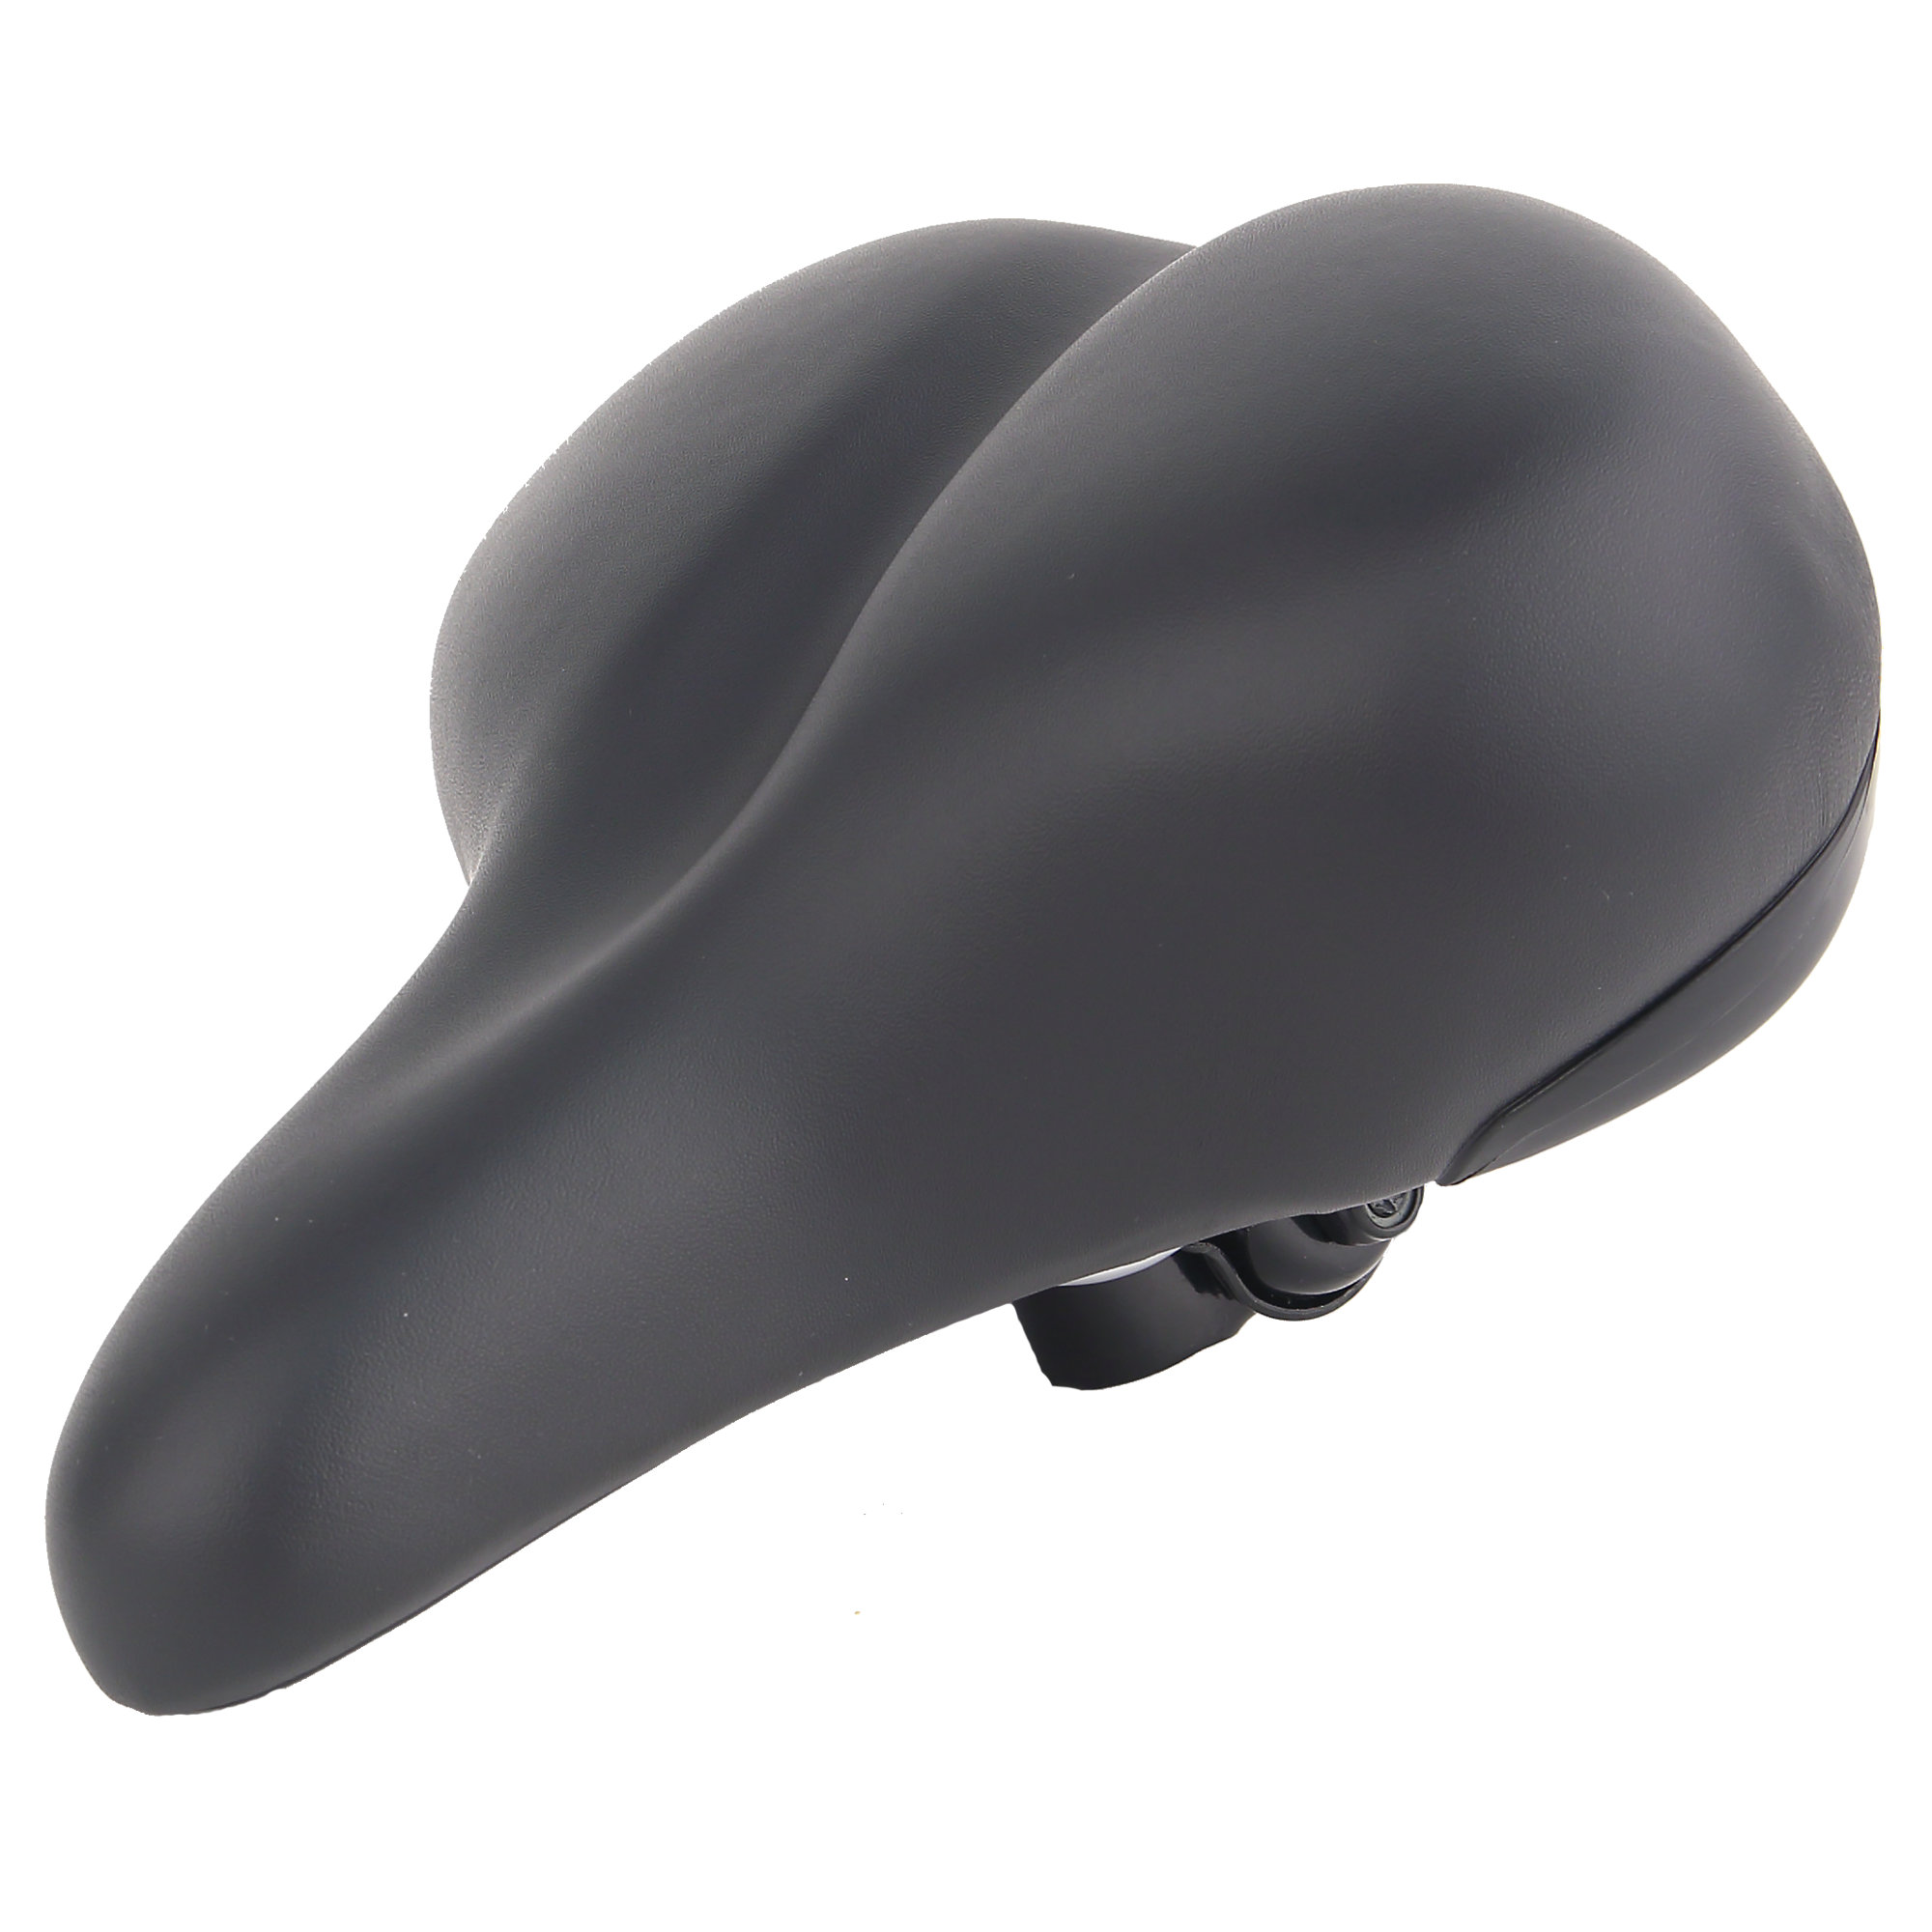 Saddle for the Assault Air Bike